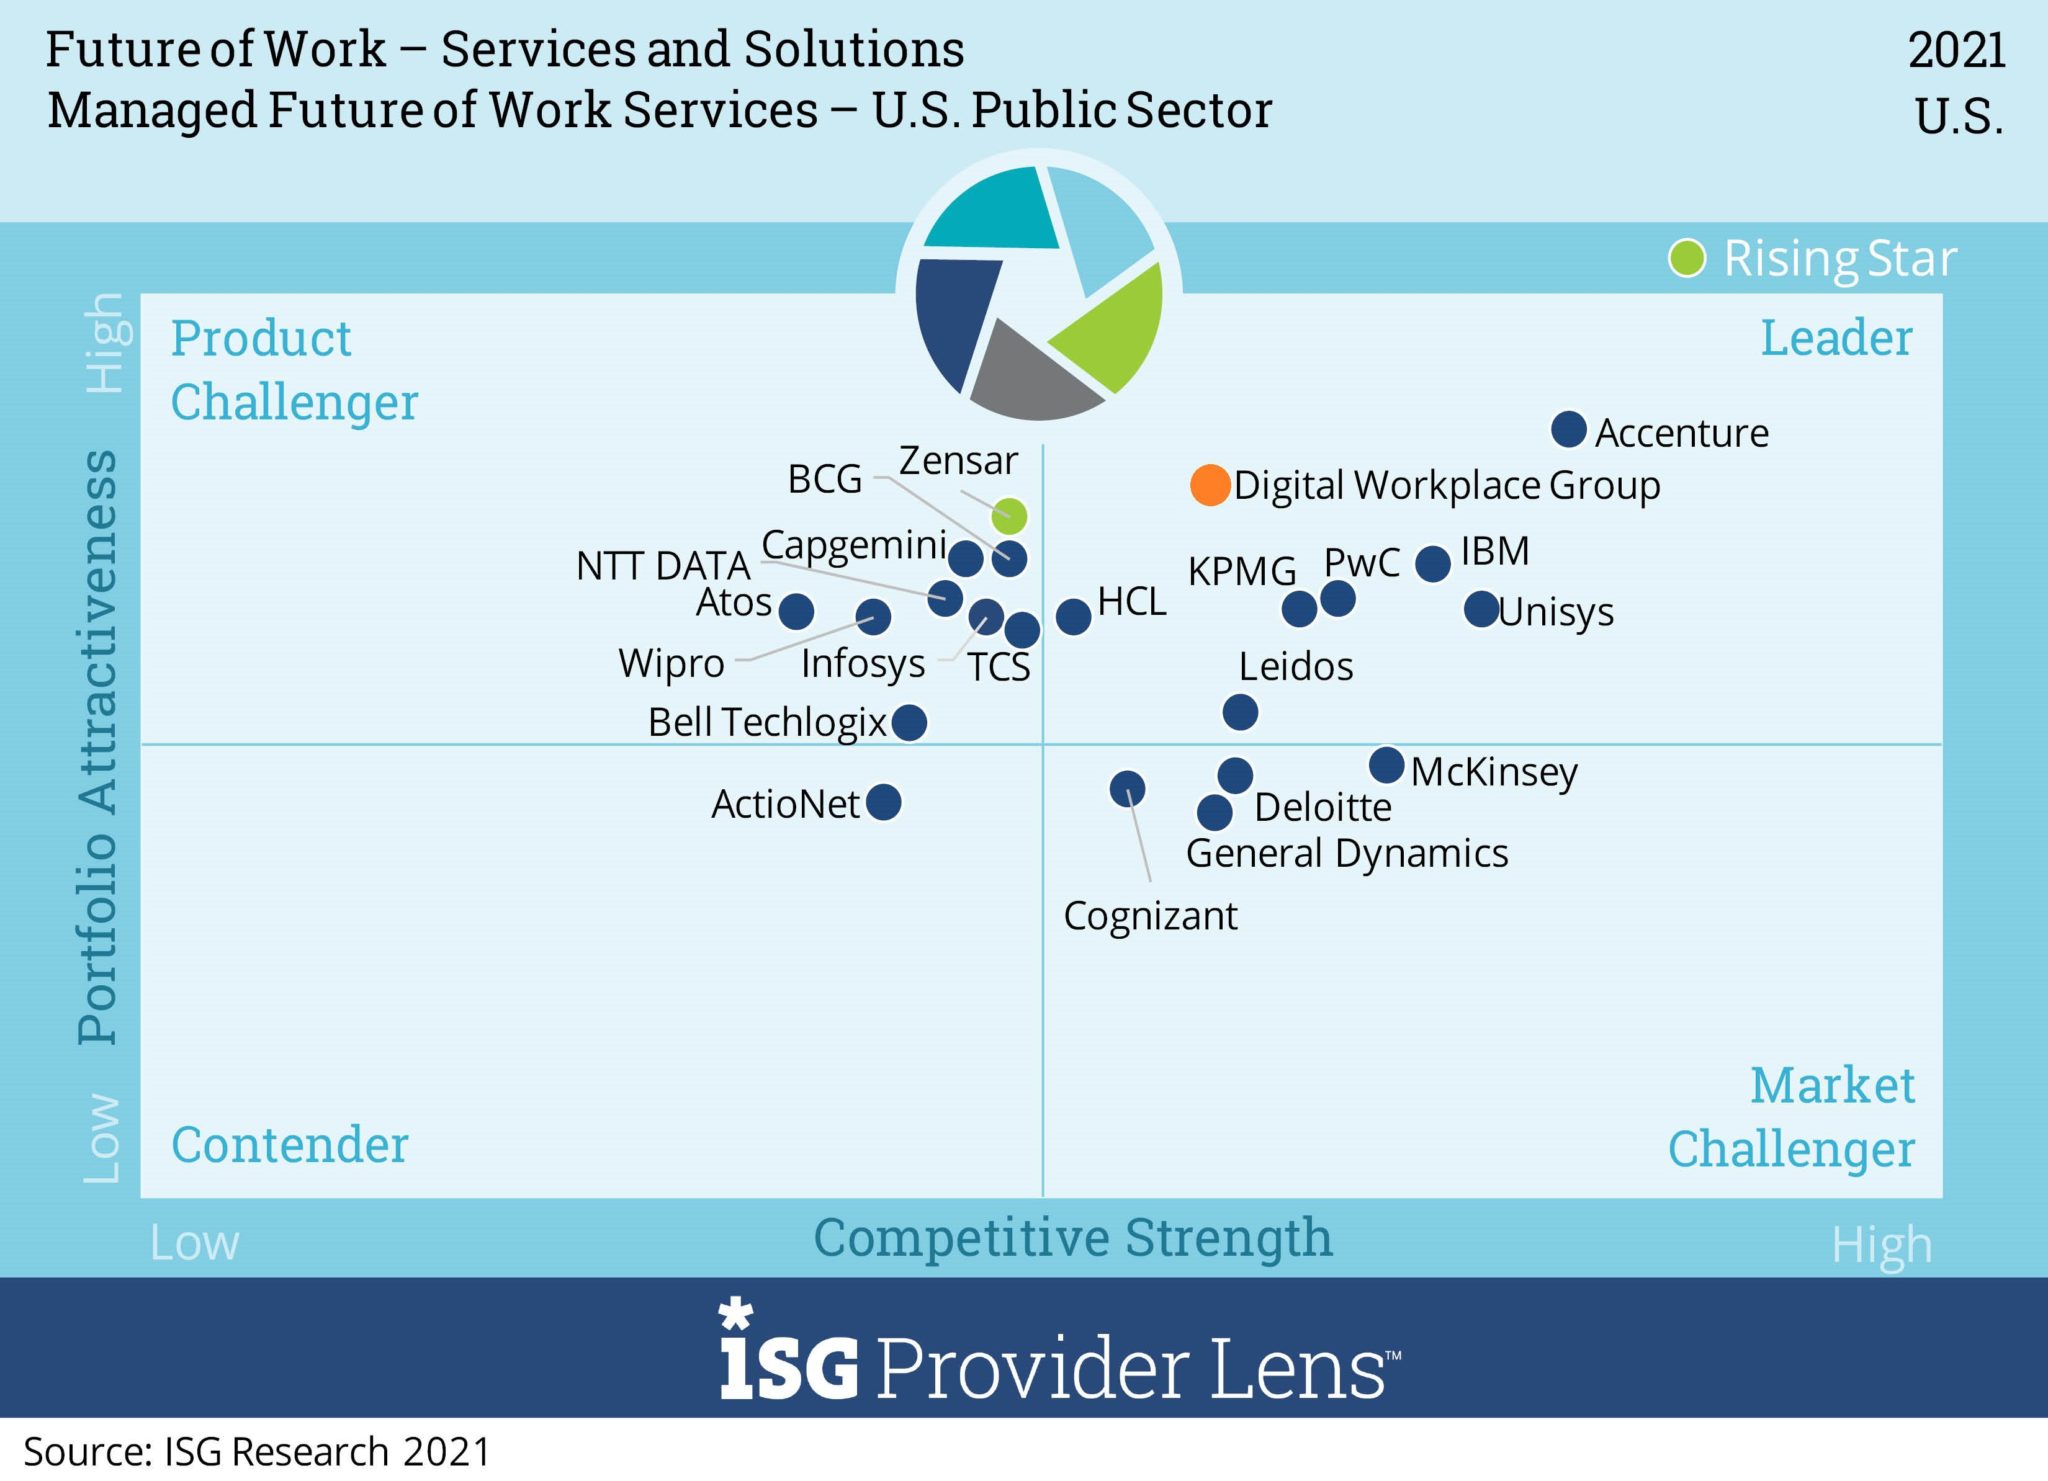 ISG Future of Work Quadrant showing DWG in the top right quadrant